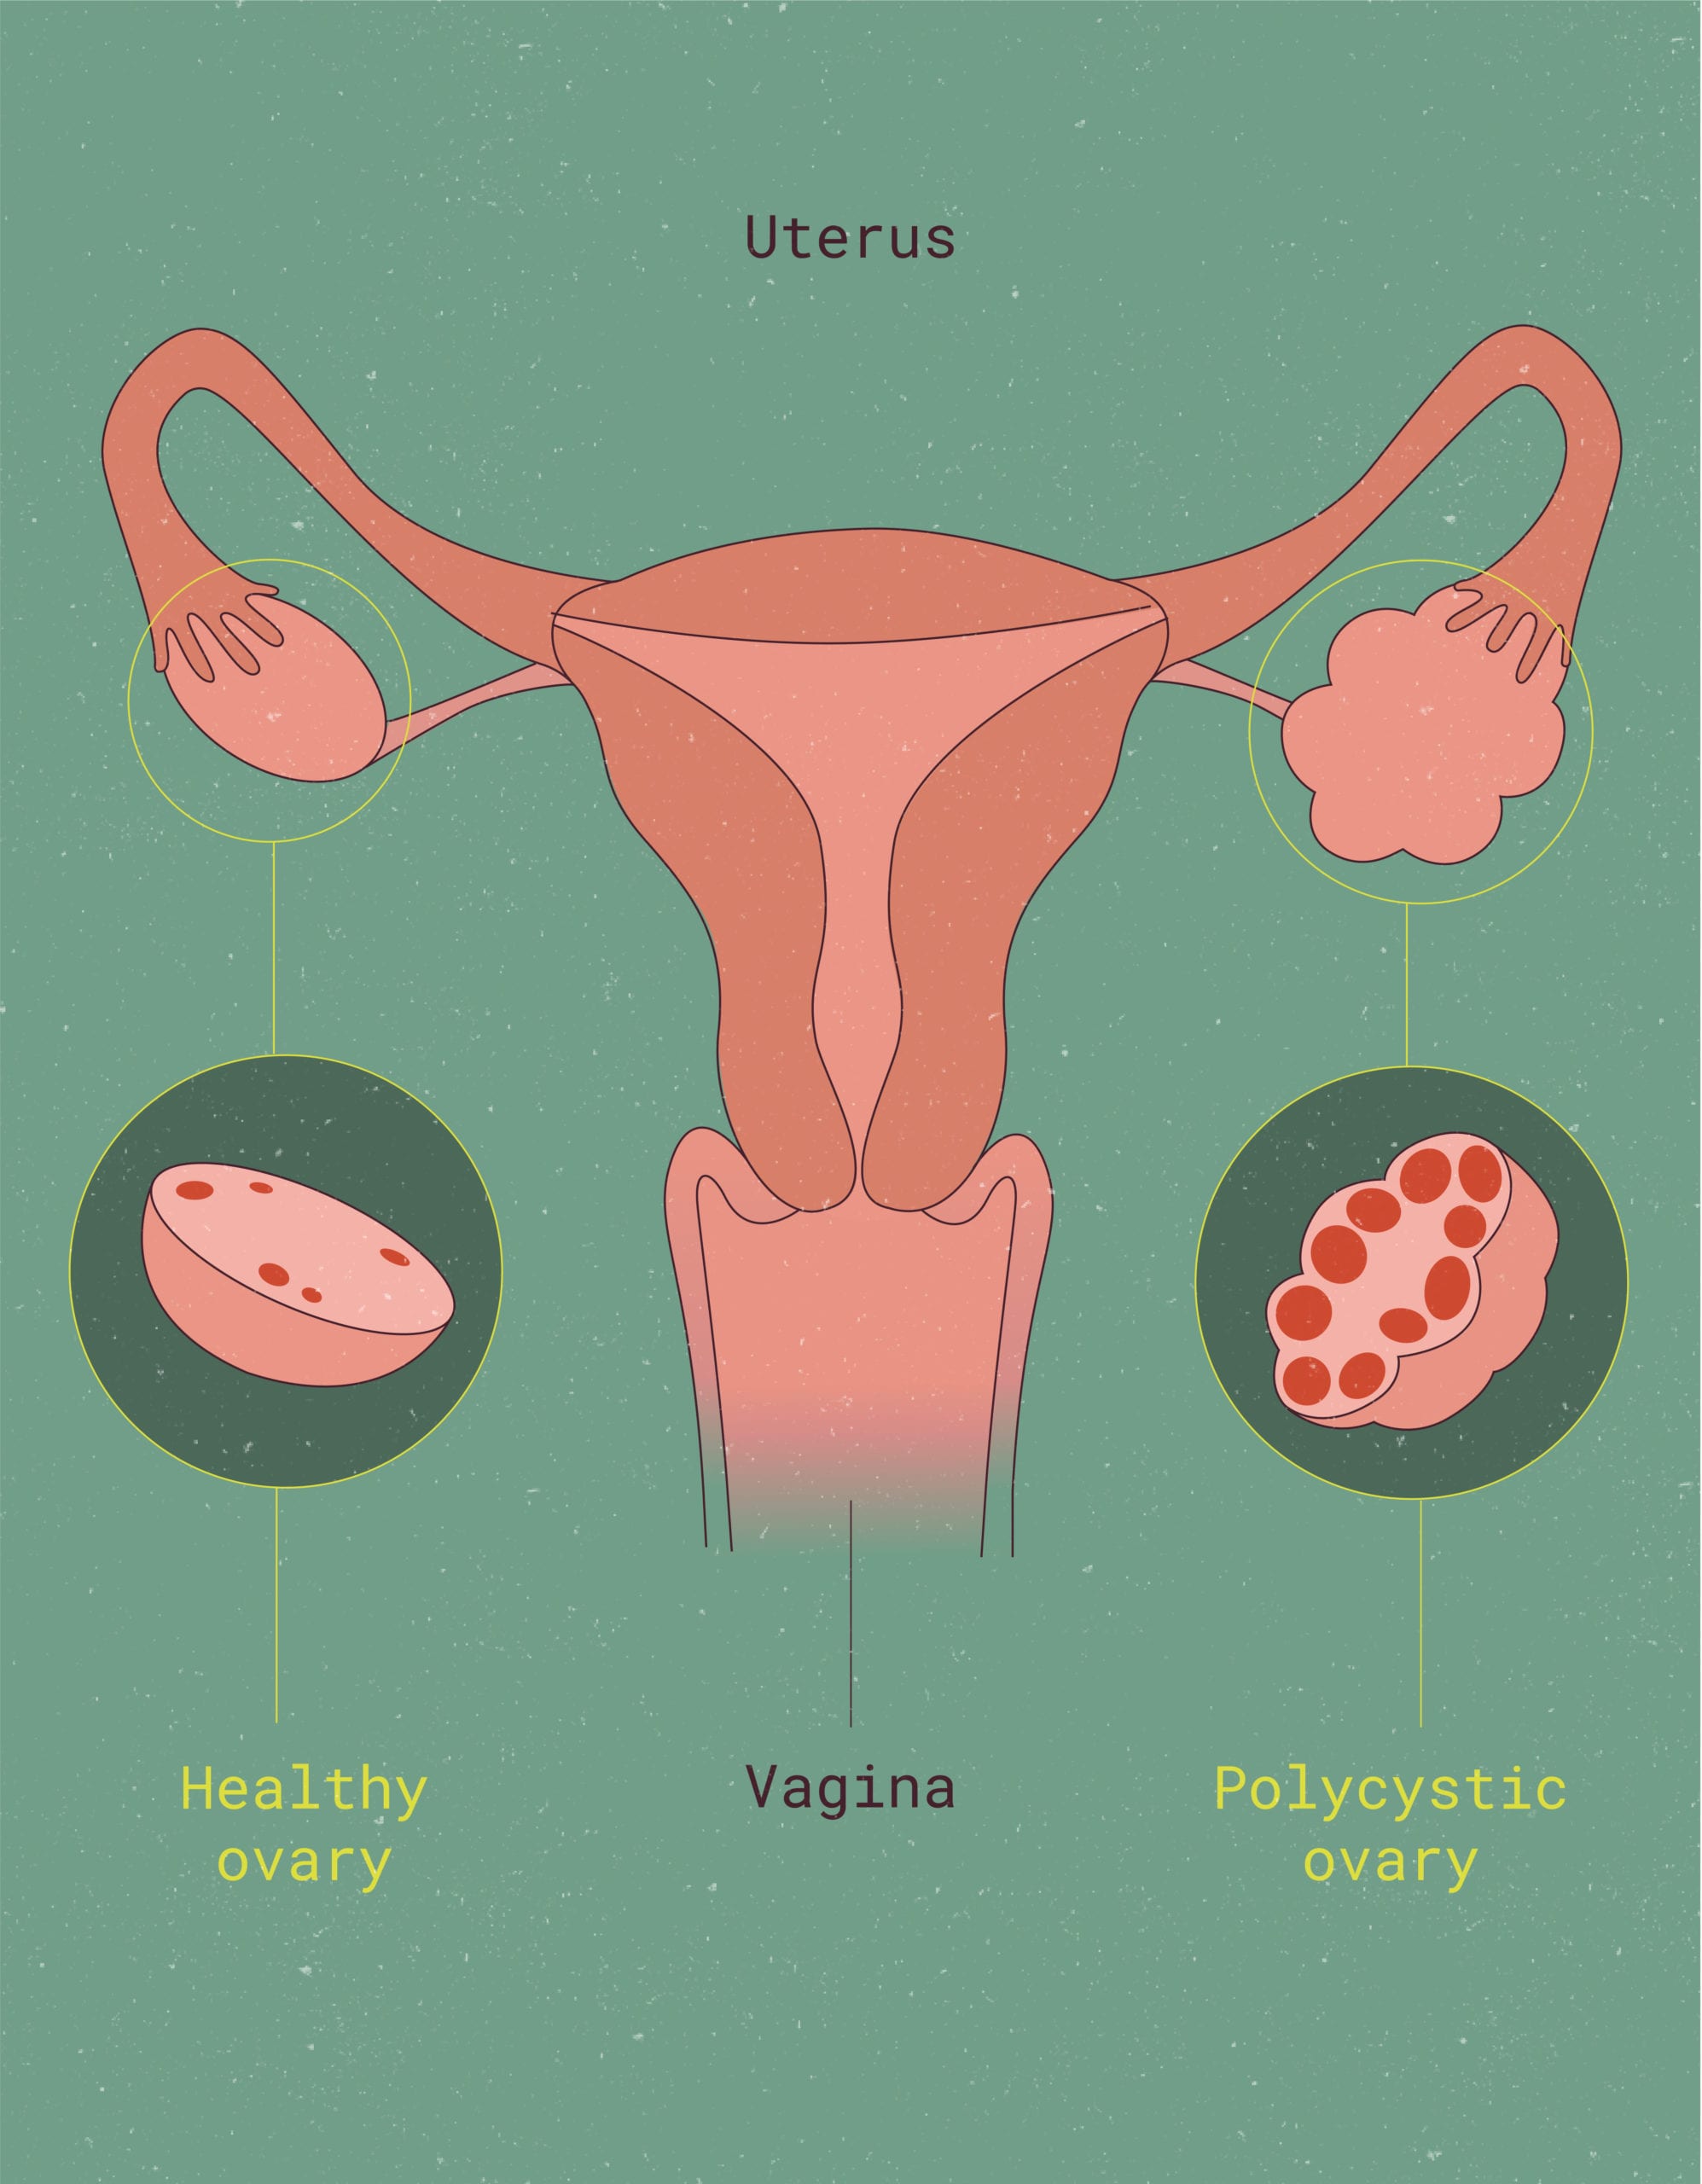 Guide to polycystic ovary syndrome (PCOS)